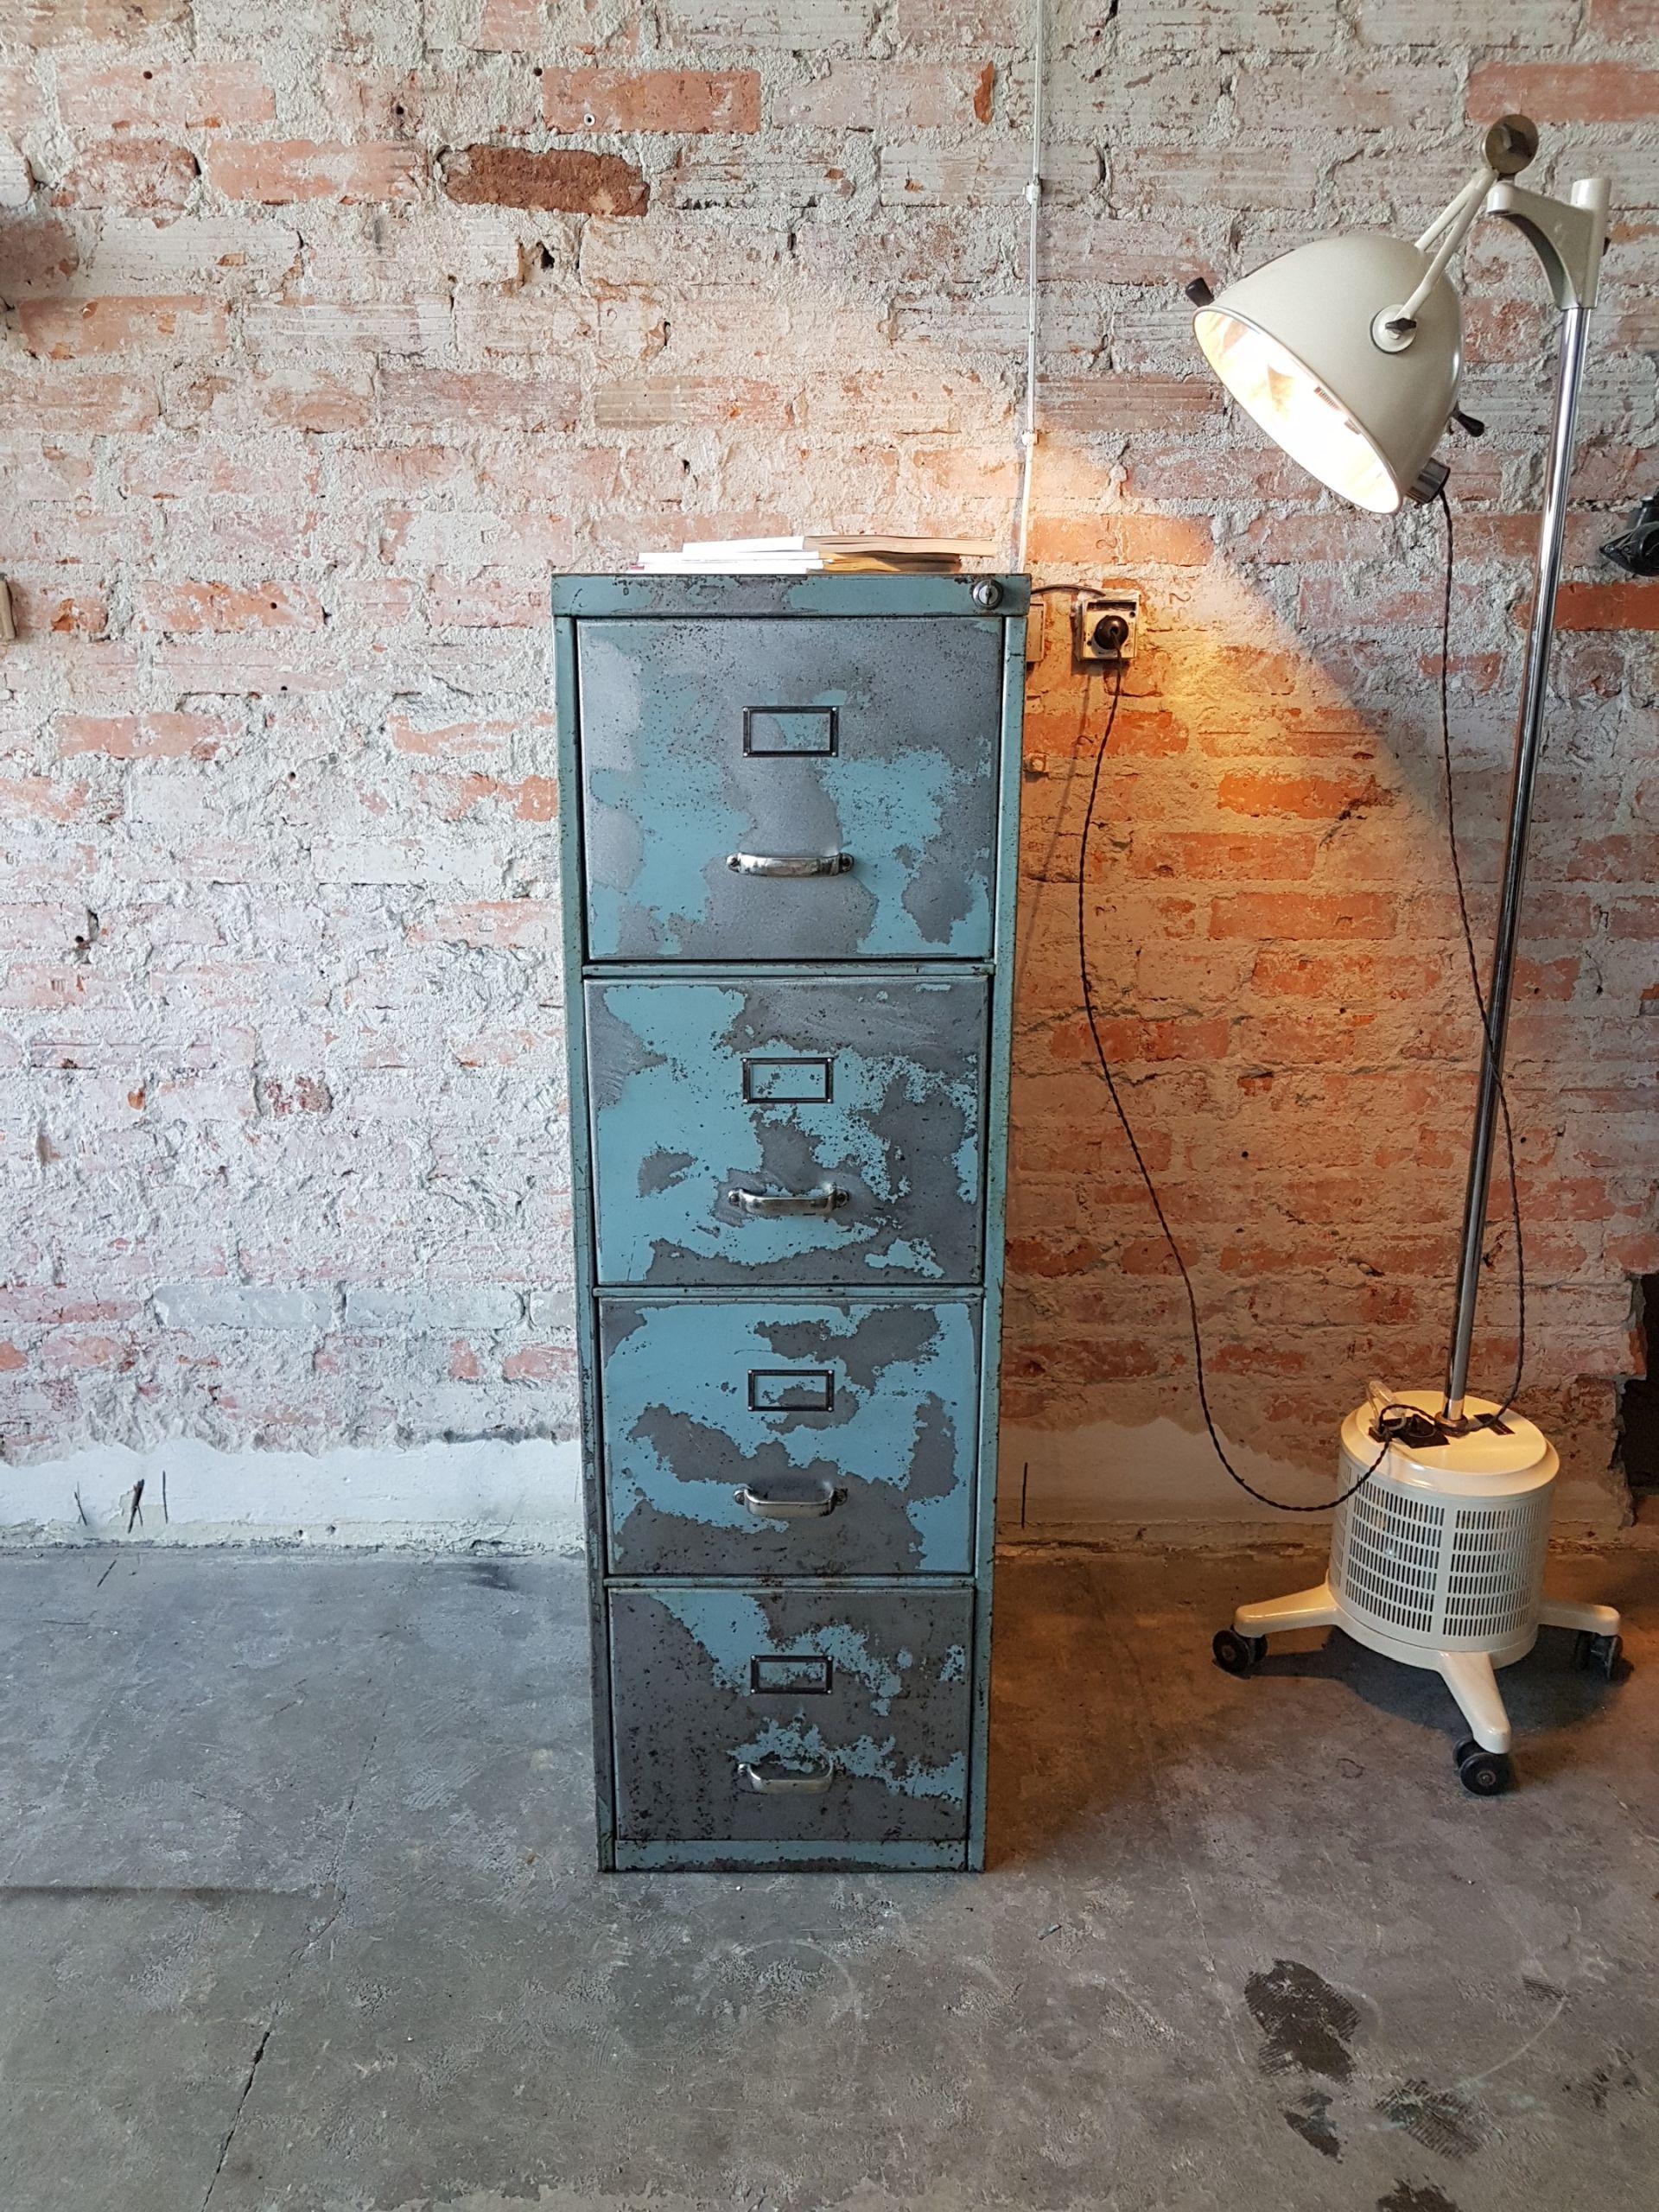 This wonderful file cabinet has been customized in Mag Haus workshop with a stripped, polished, raw steel patina sealed with a gloss lacquer finish. The original green and polished metal is beautifully complimented by the polished original chrome